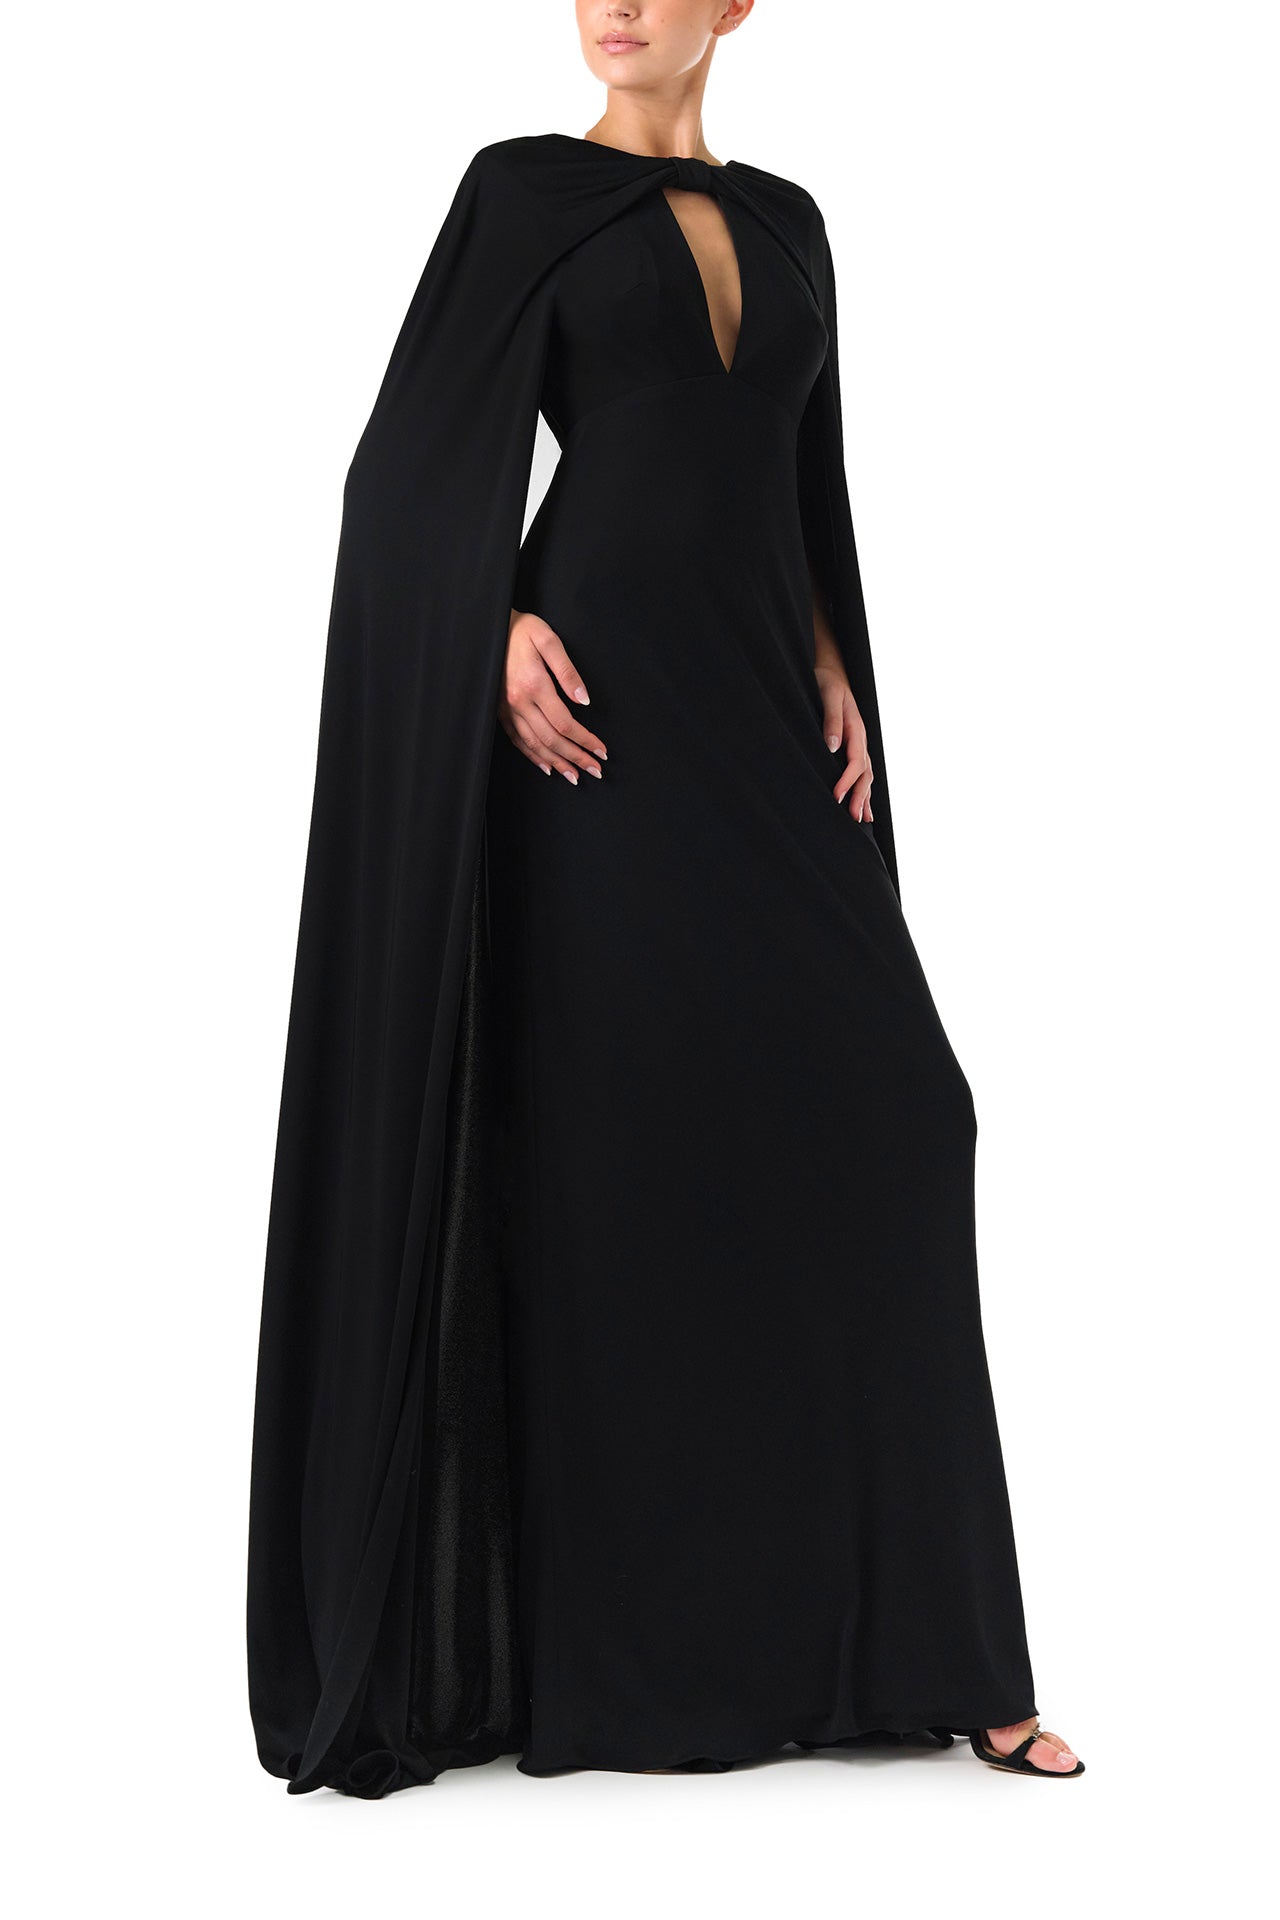 Monique Lhuillier Spring 2024 black crepe-back satin gown with attached cape and keyhole bodice - right side.